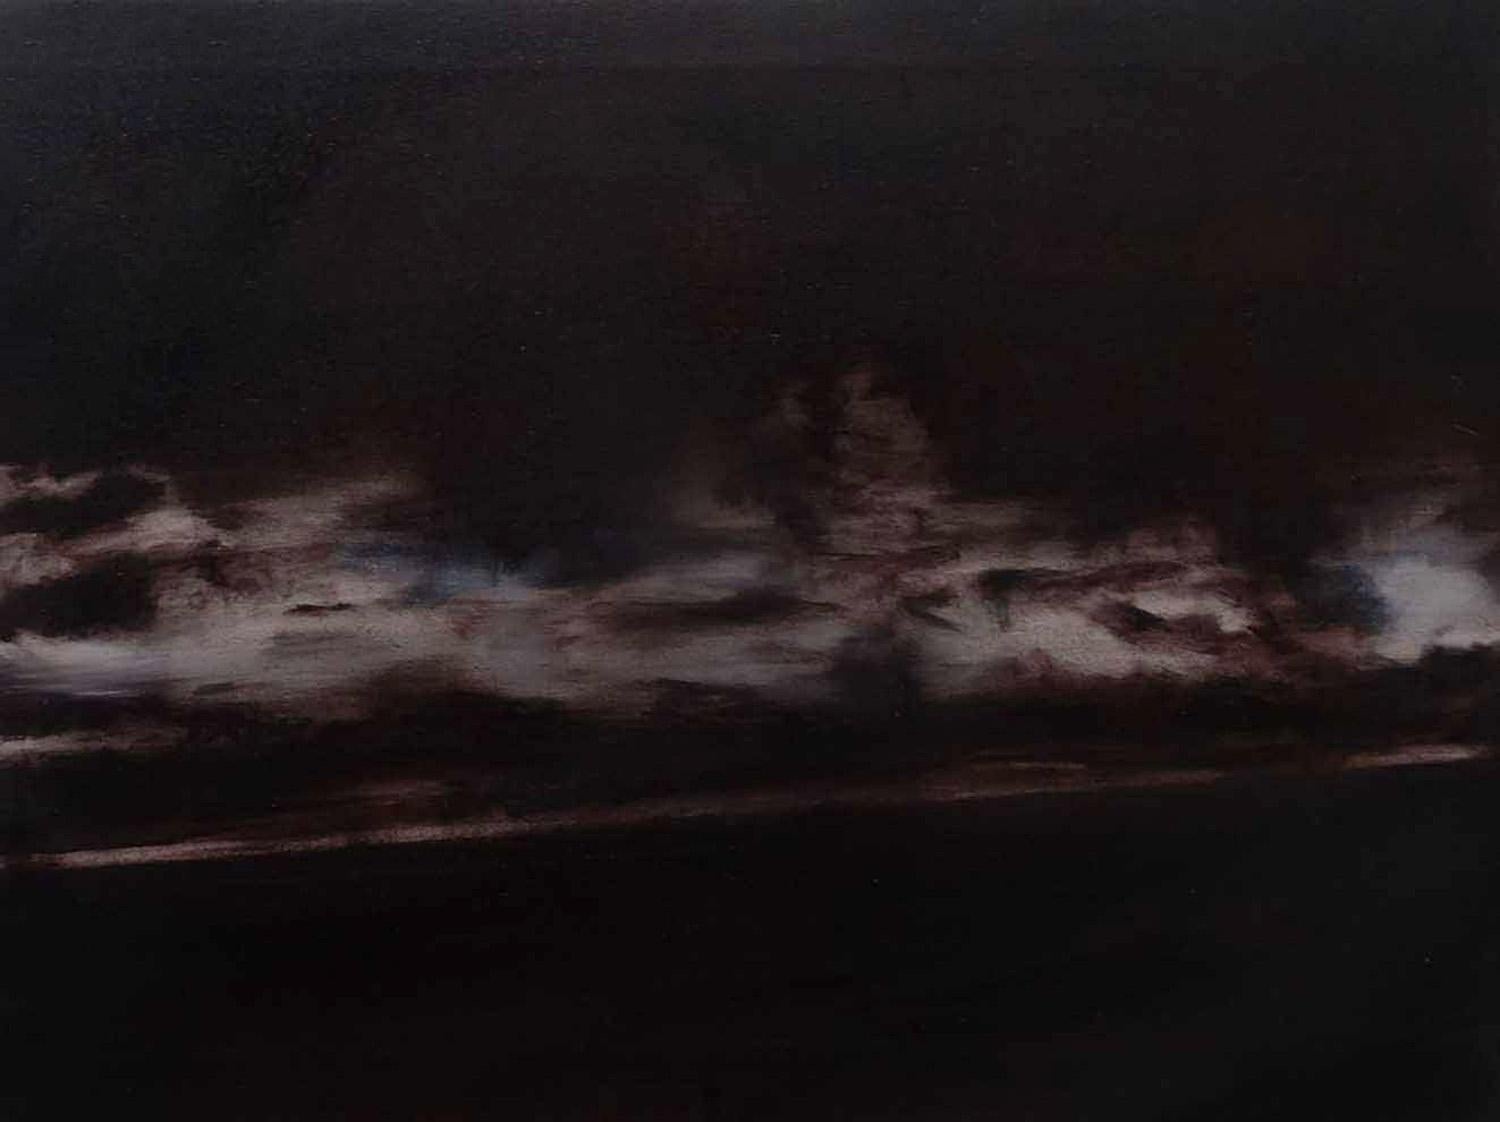 Annamarie Dzendrowskyj, Twilight - Into the Night - M25 I
Signed by the artist
Oil on canvas
Size: H 28 x W 38cm 
Sold Unframed
Please note that insitu images are purely an indication of how a piece may look
Annamarie seeks to explore that ‘grey